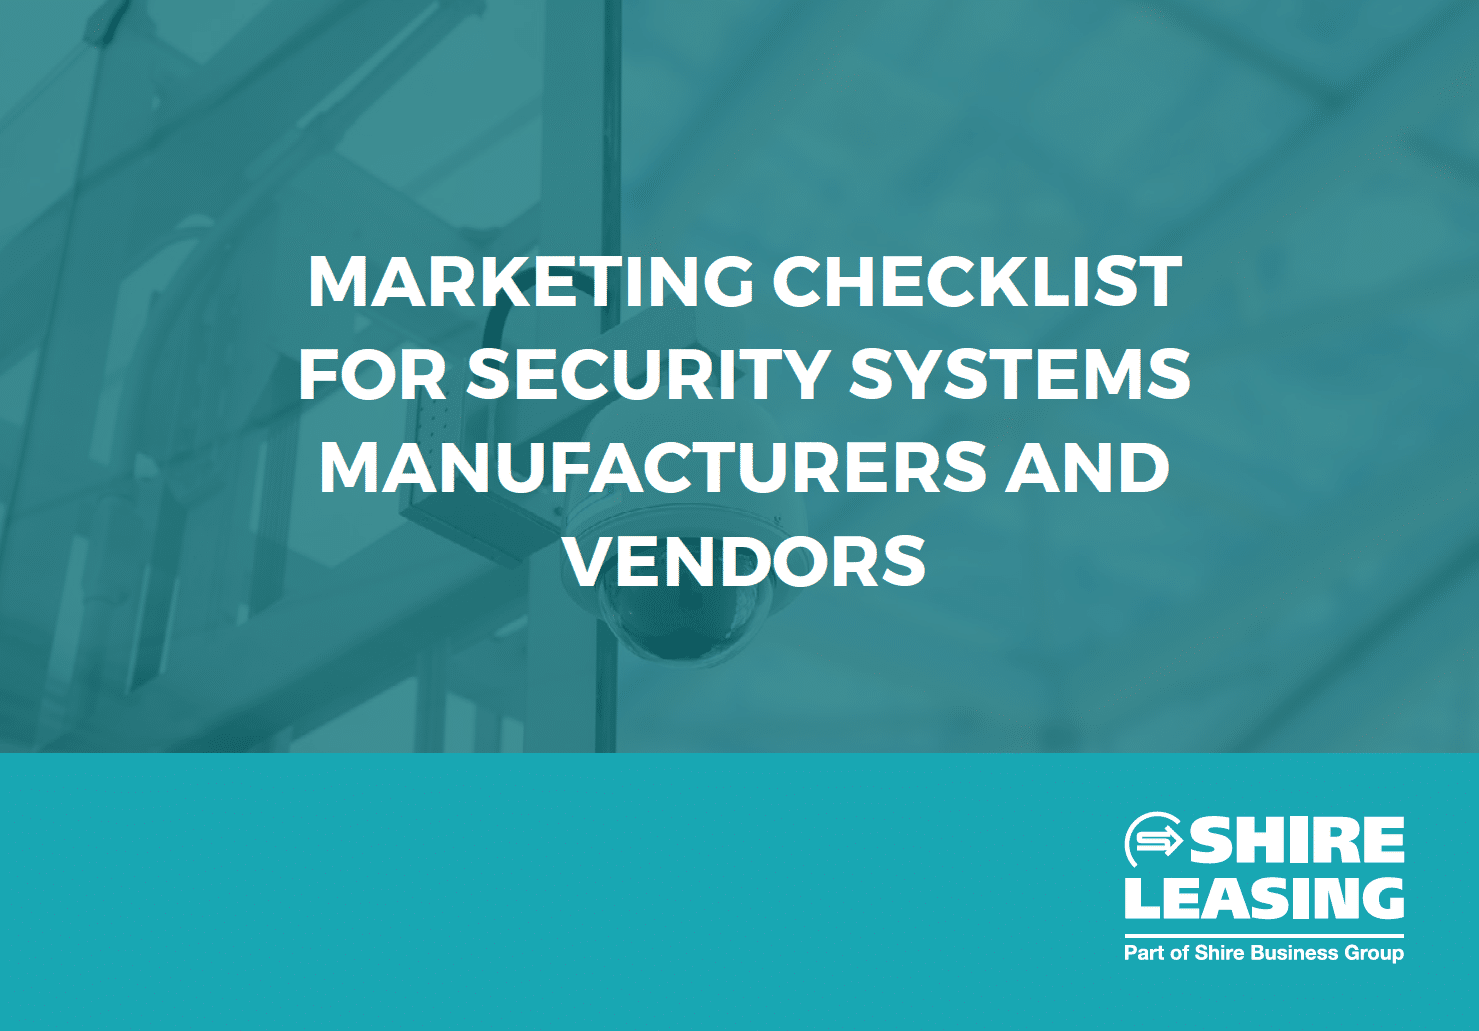 Marketing checklist for security manufacturers and vendors